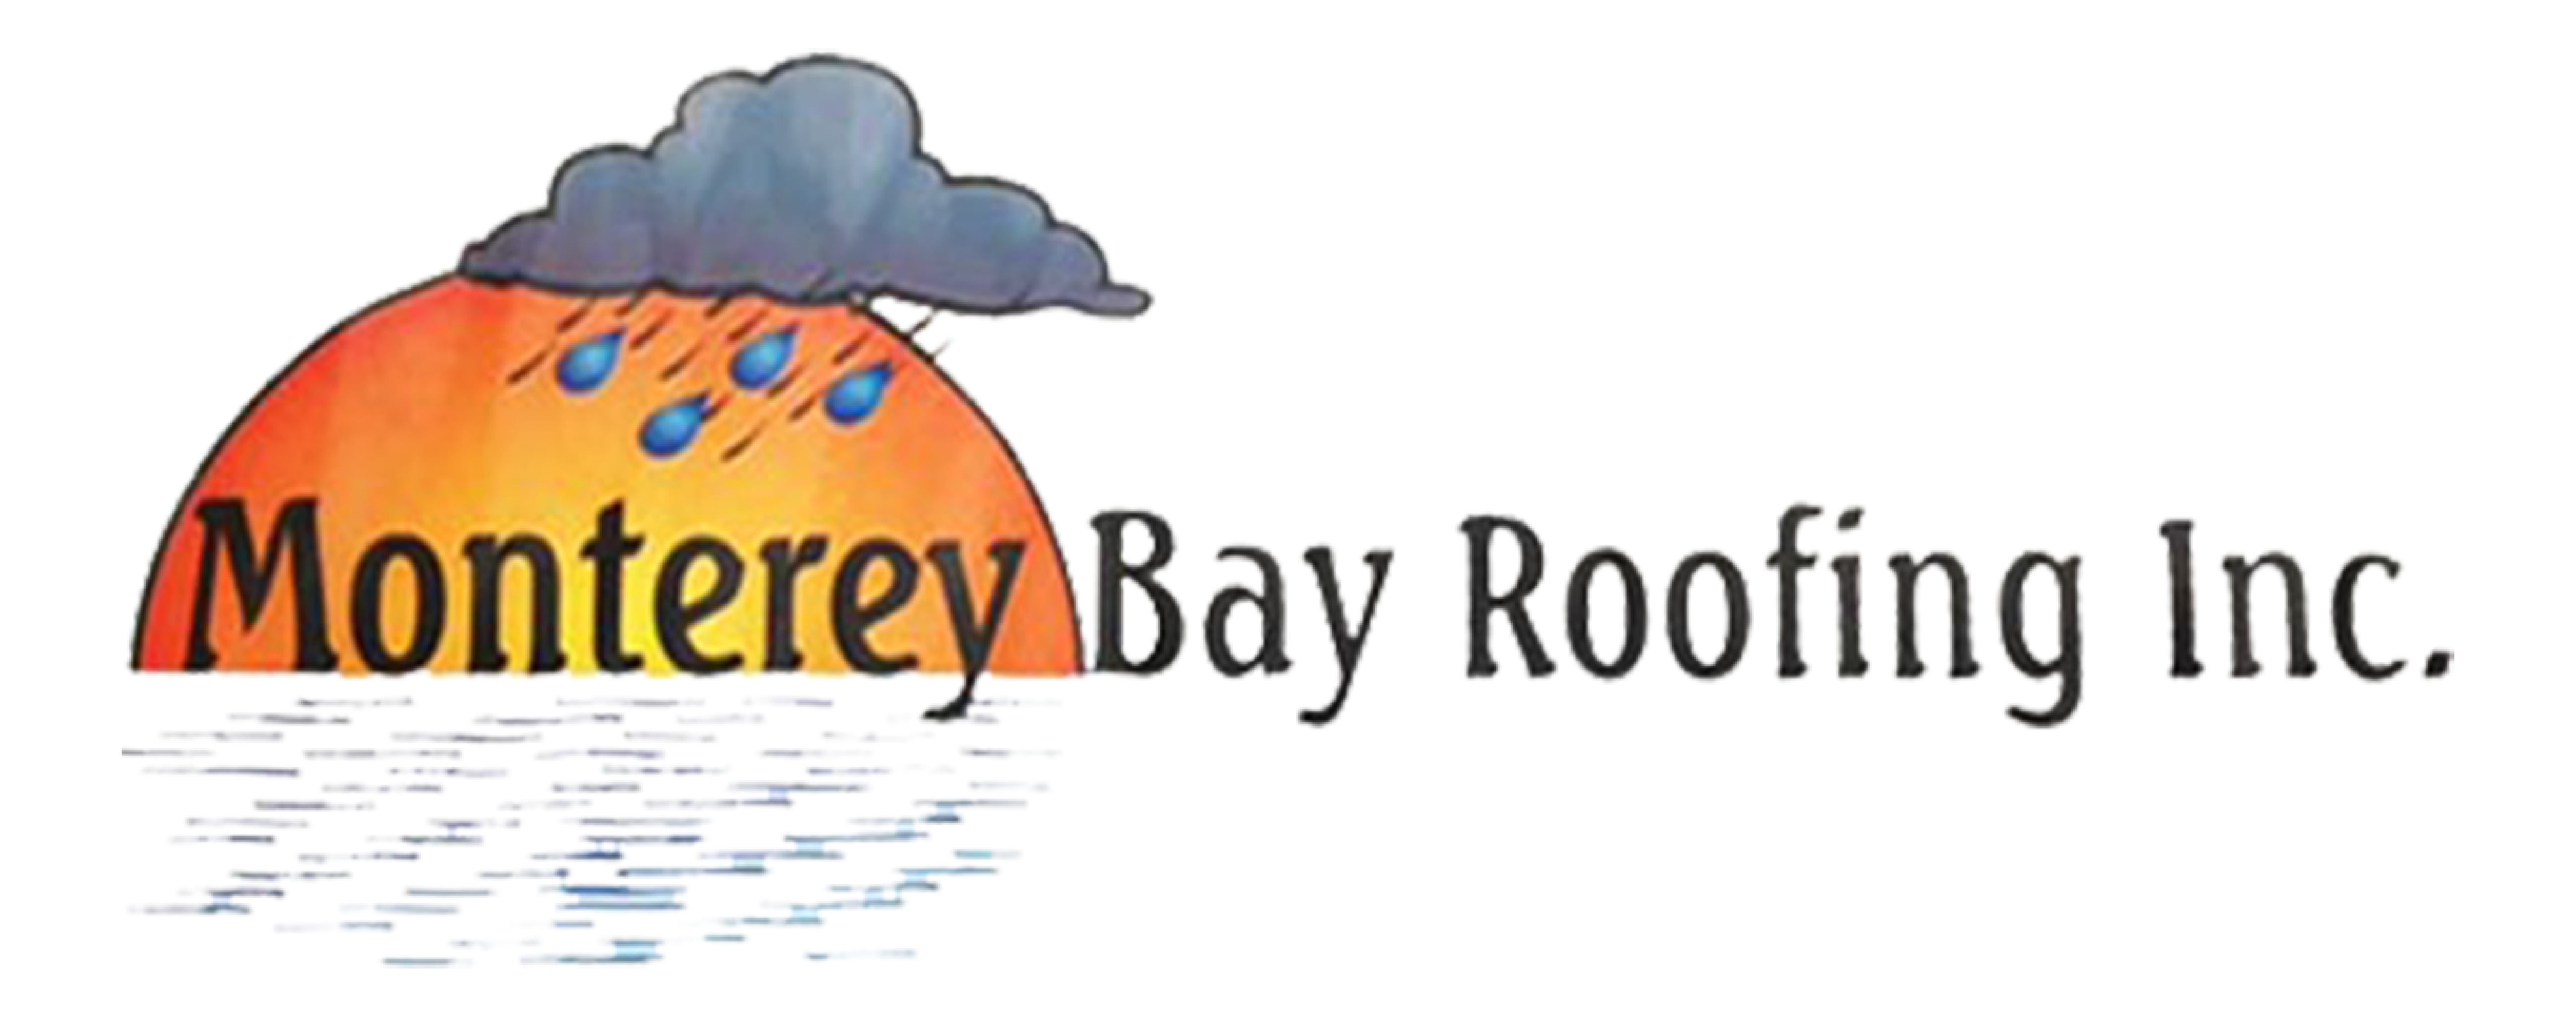 montereybay-roofing_logo-color